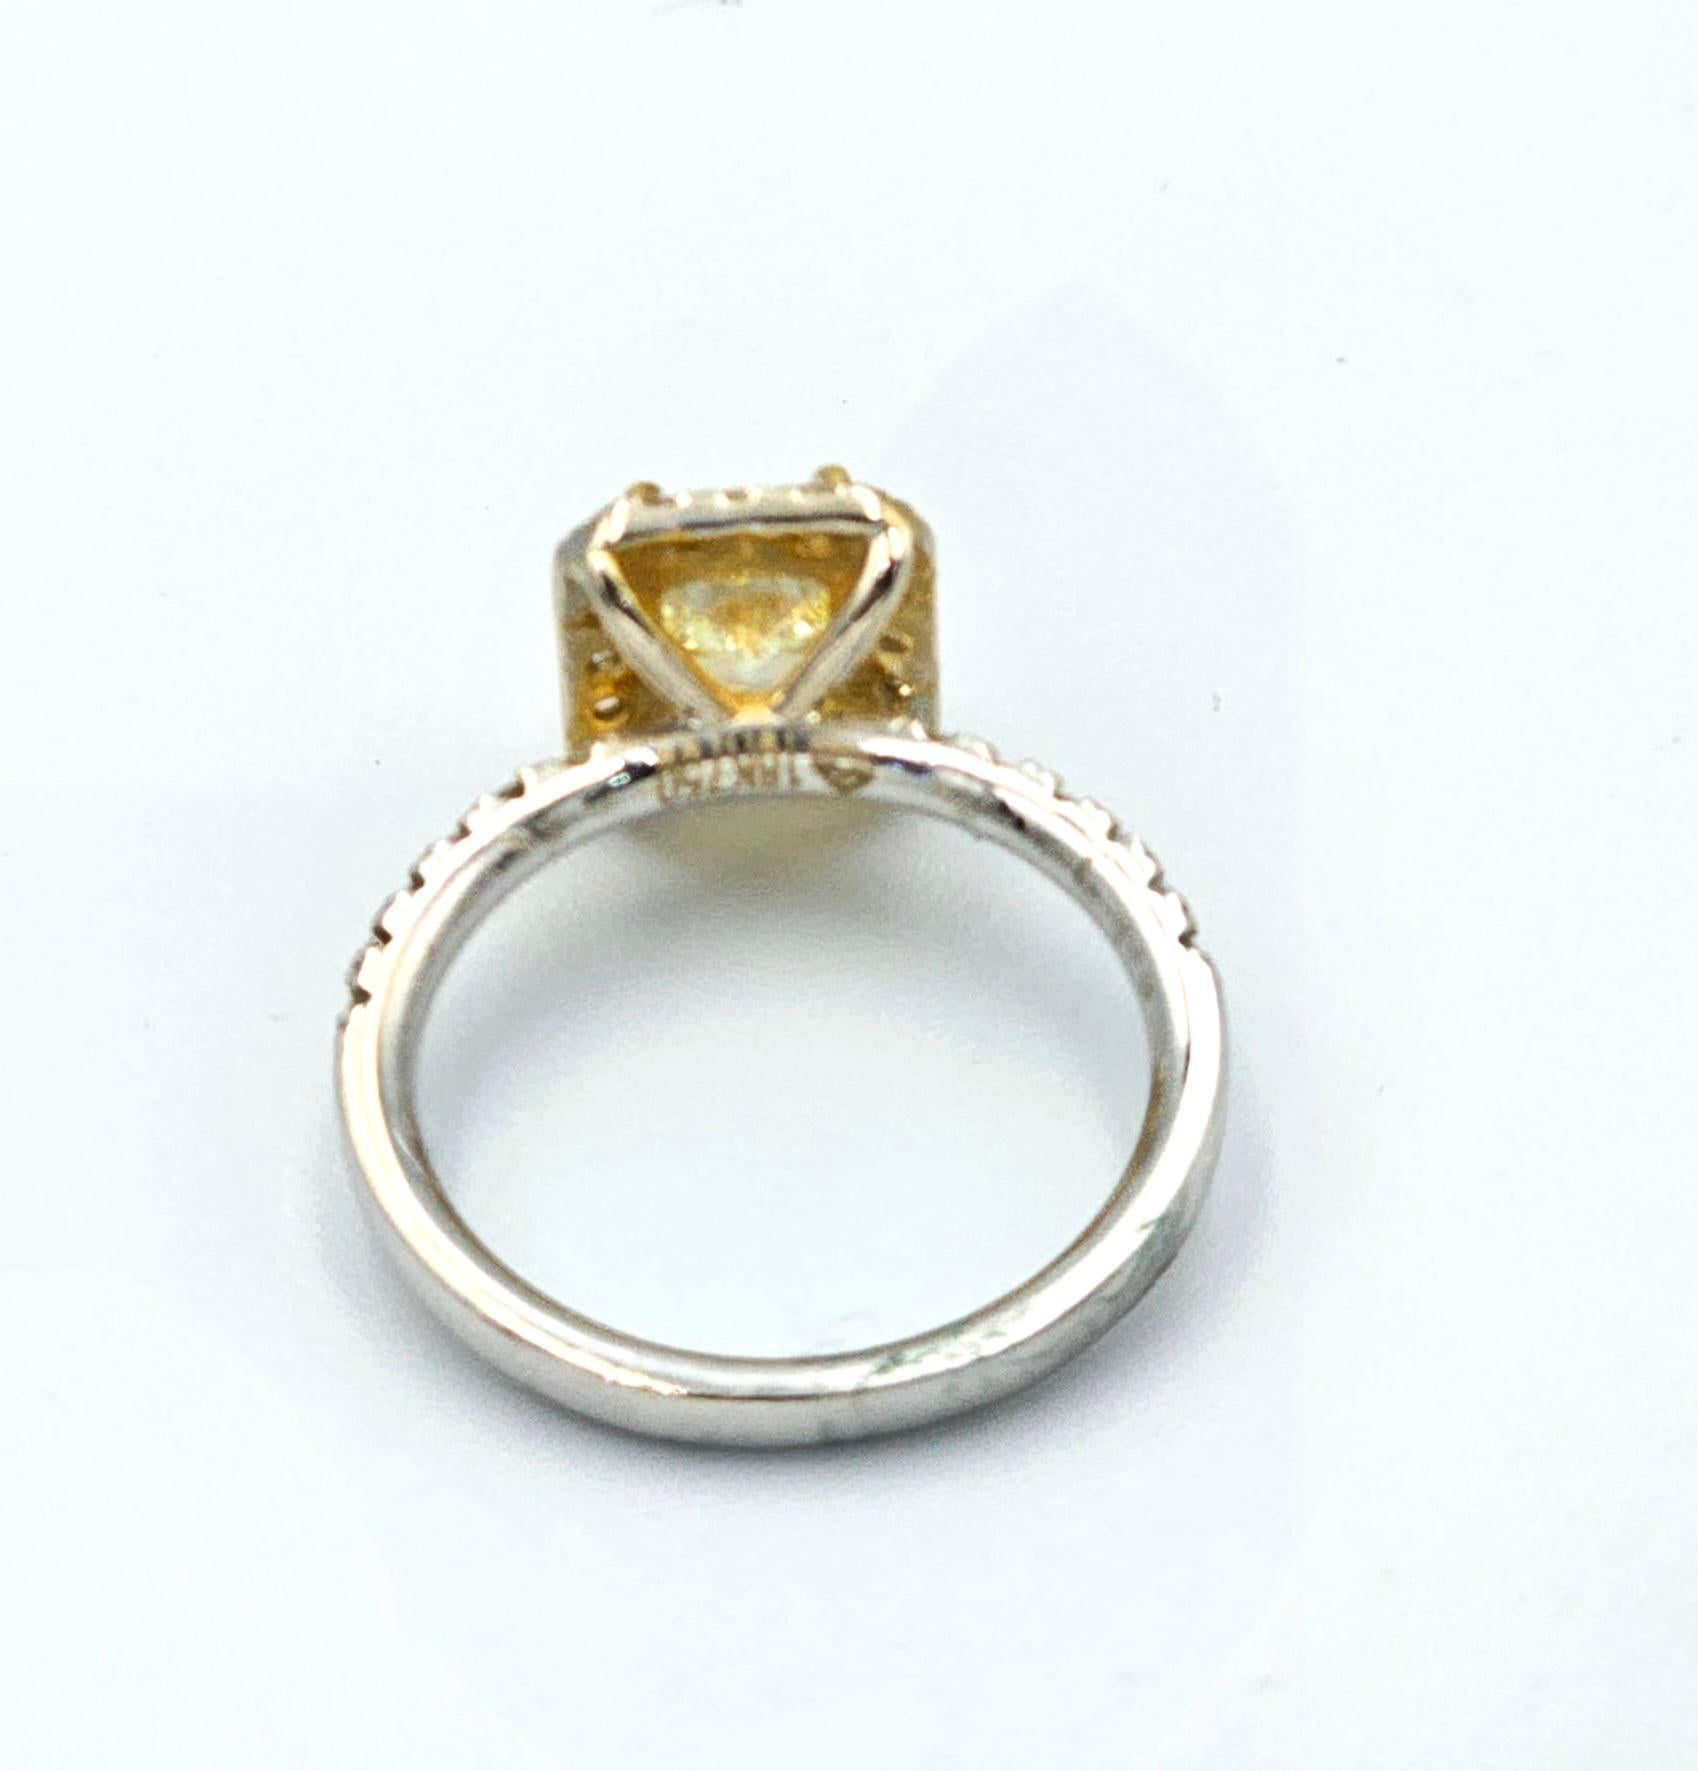 This is a beautiful GIA certified Fancy Yellow Diamond Ring with diamonds and 18k gold. It is a beautiful and amazing piece with vivid color, set in a custom designed ring to enhance its natural beauty!
Fancy Yellow Diamond : 1.09